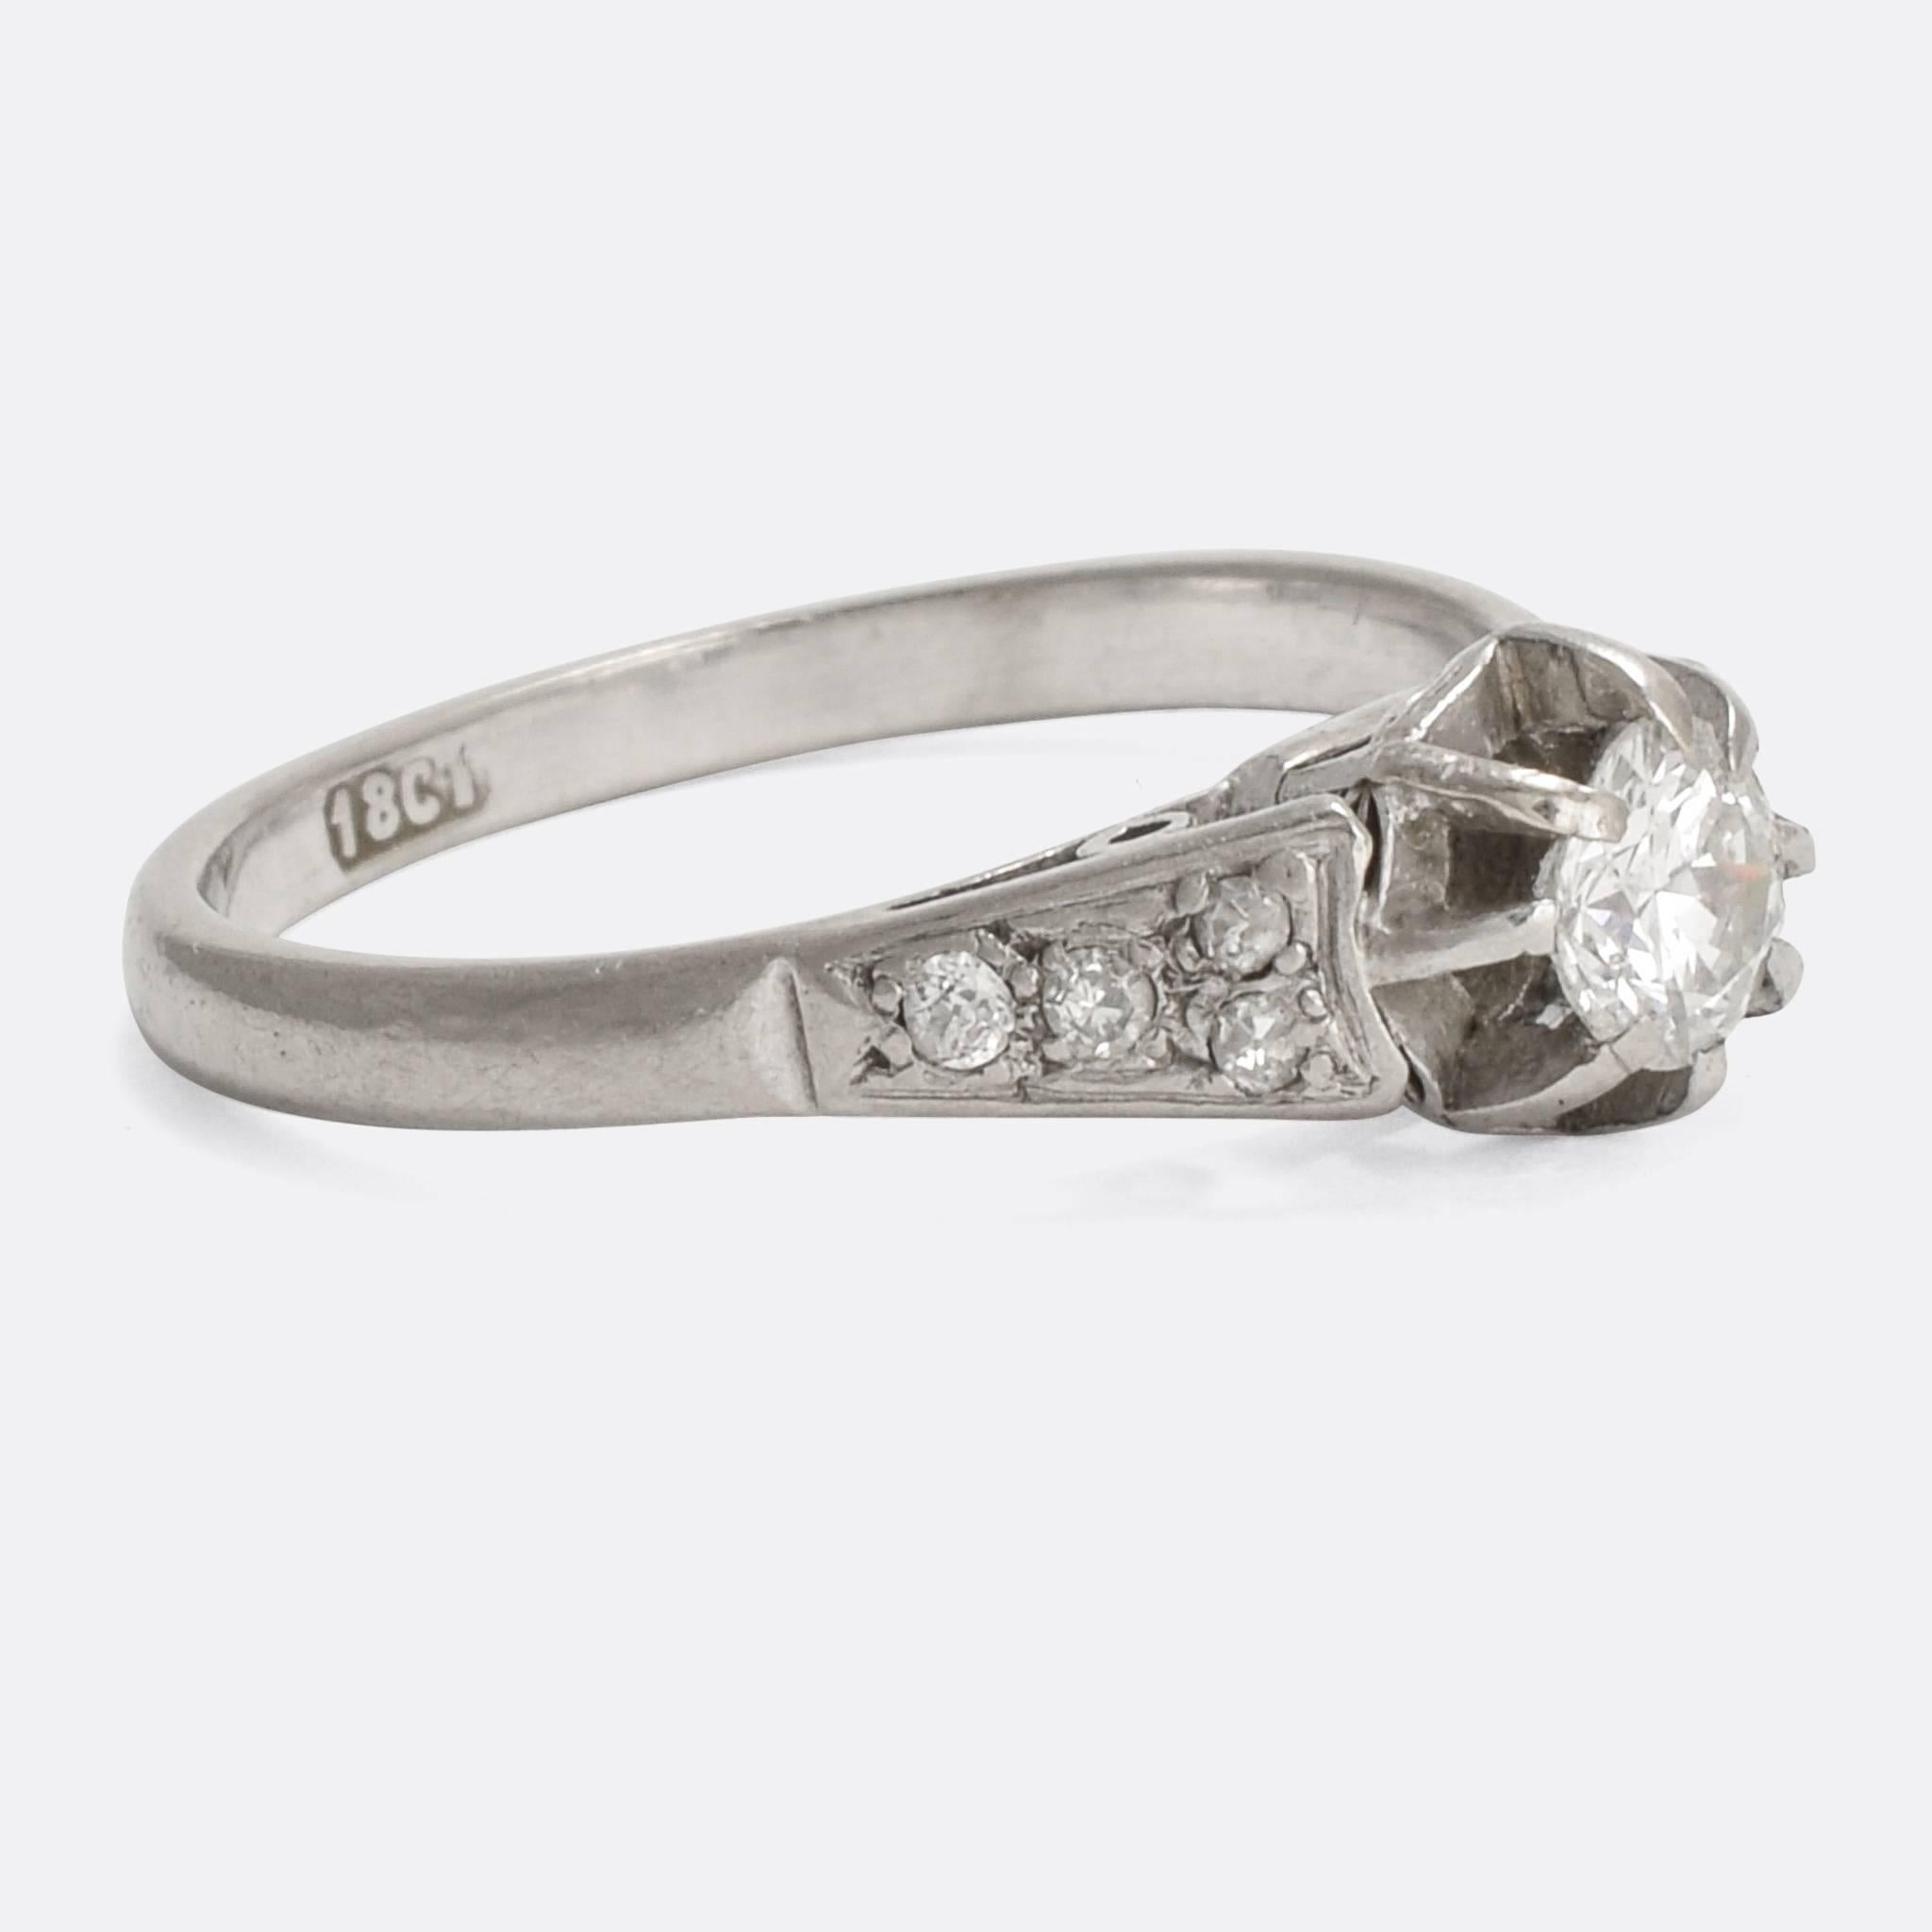 A stylish Art Deco diamond solitaire engagement ring, set with a .40ct old English brilliant cut stone in elegant scalloped mounts. It's modelled in 18 karat white gold, well proportioned with diamond shoulder accents.

STONES
Old English Brilliant